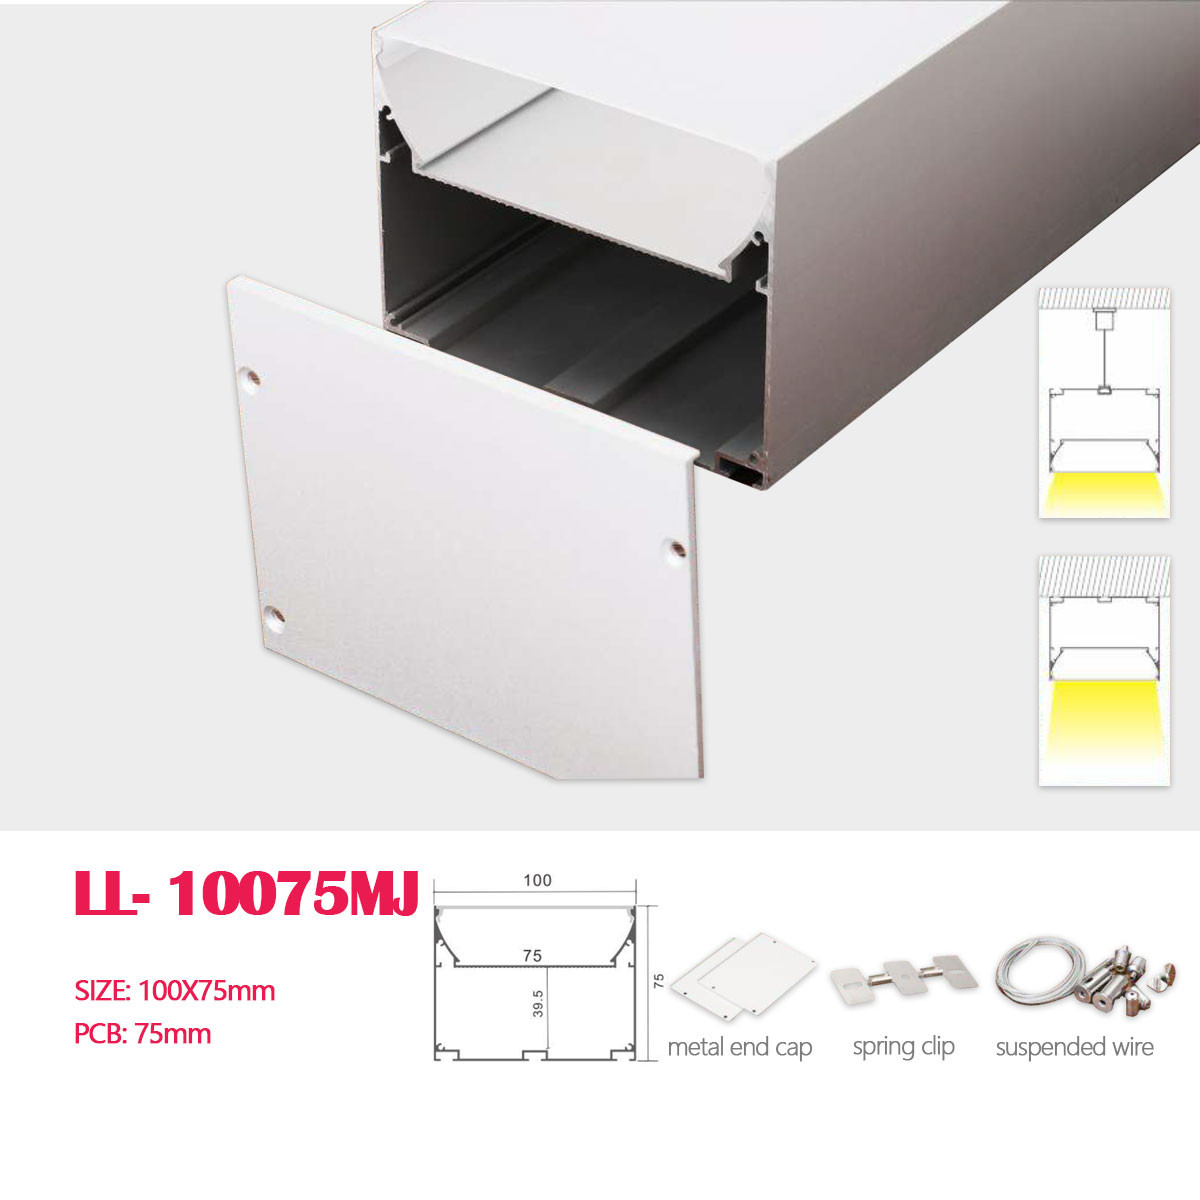 1M (3.28FT)100MM*75MM Square Double-layer Aluminum Profile with Flat PC cover and Suspension wire, Suspended Mounting with Pendant Hardware for Hanging or Surface Mounted LED Lighting